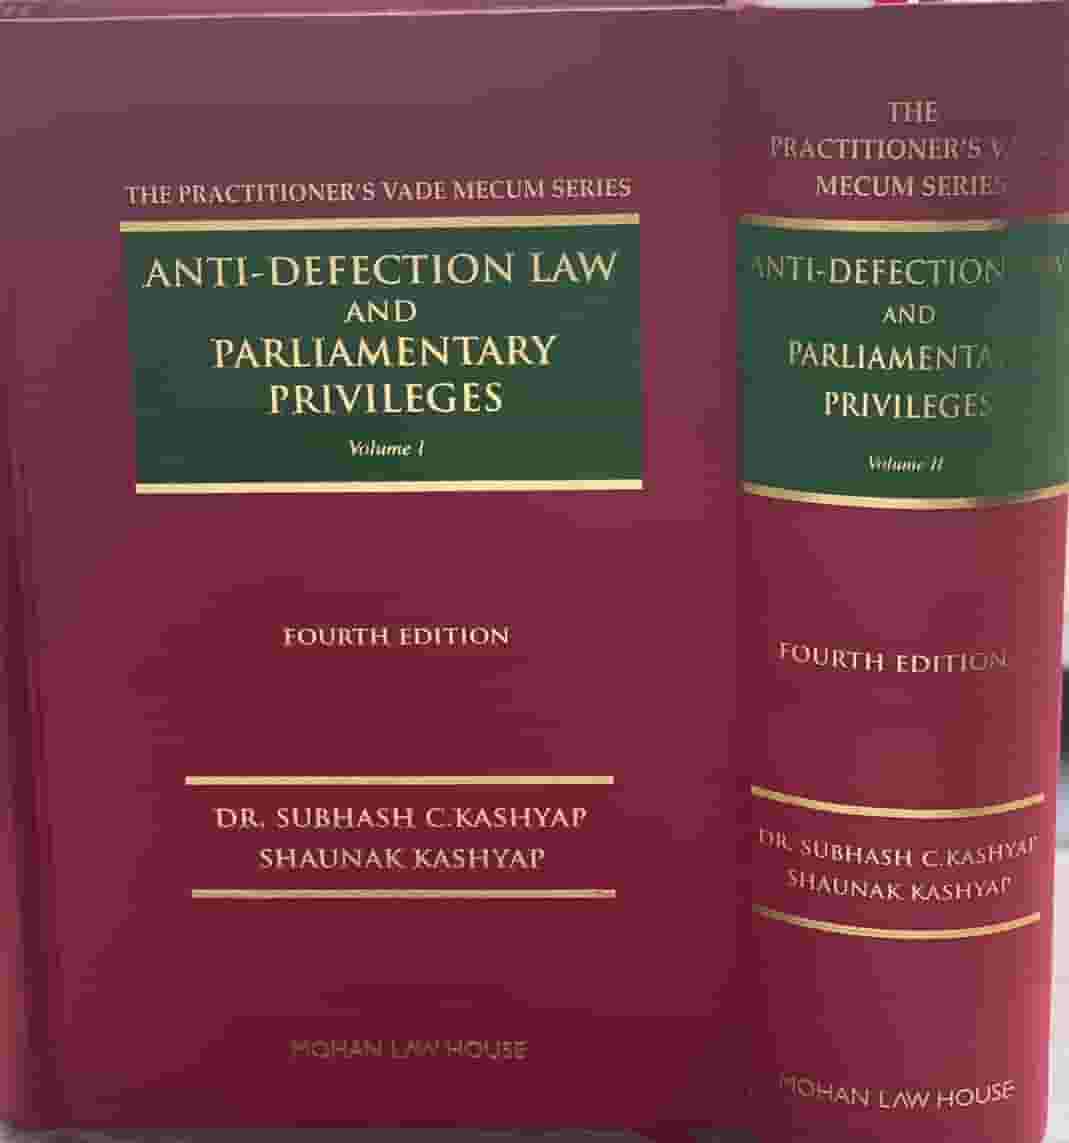 Anti-Defection-Law-and-Parliamentary-Privleges--in-2-volumes-by-Subhash-Kashyap-and-Shaunak-Kashyap